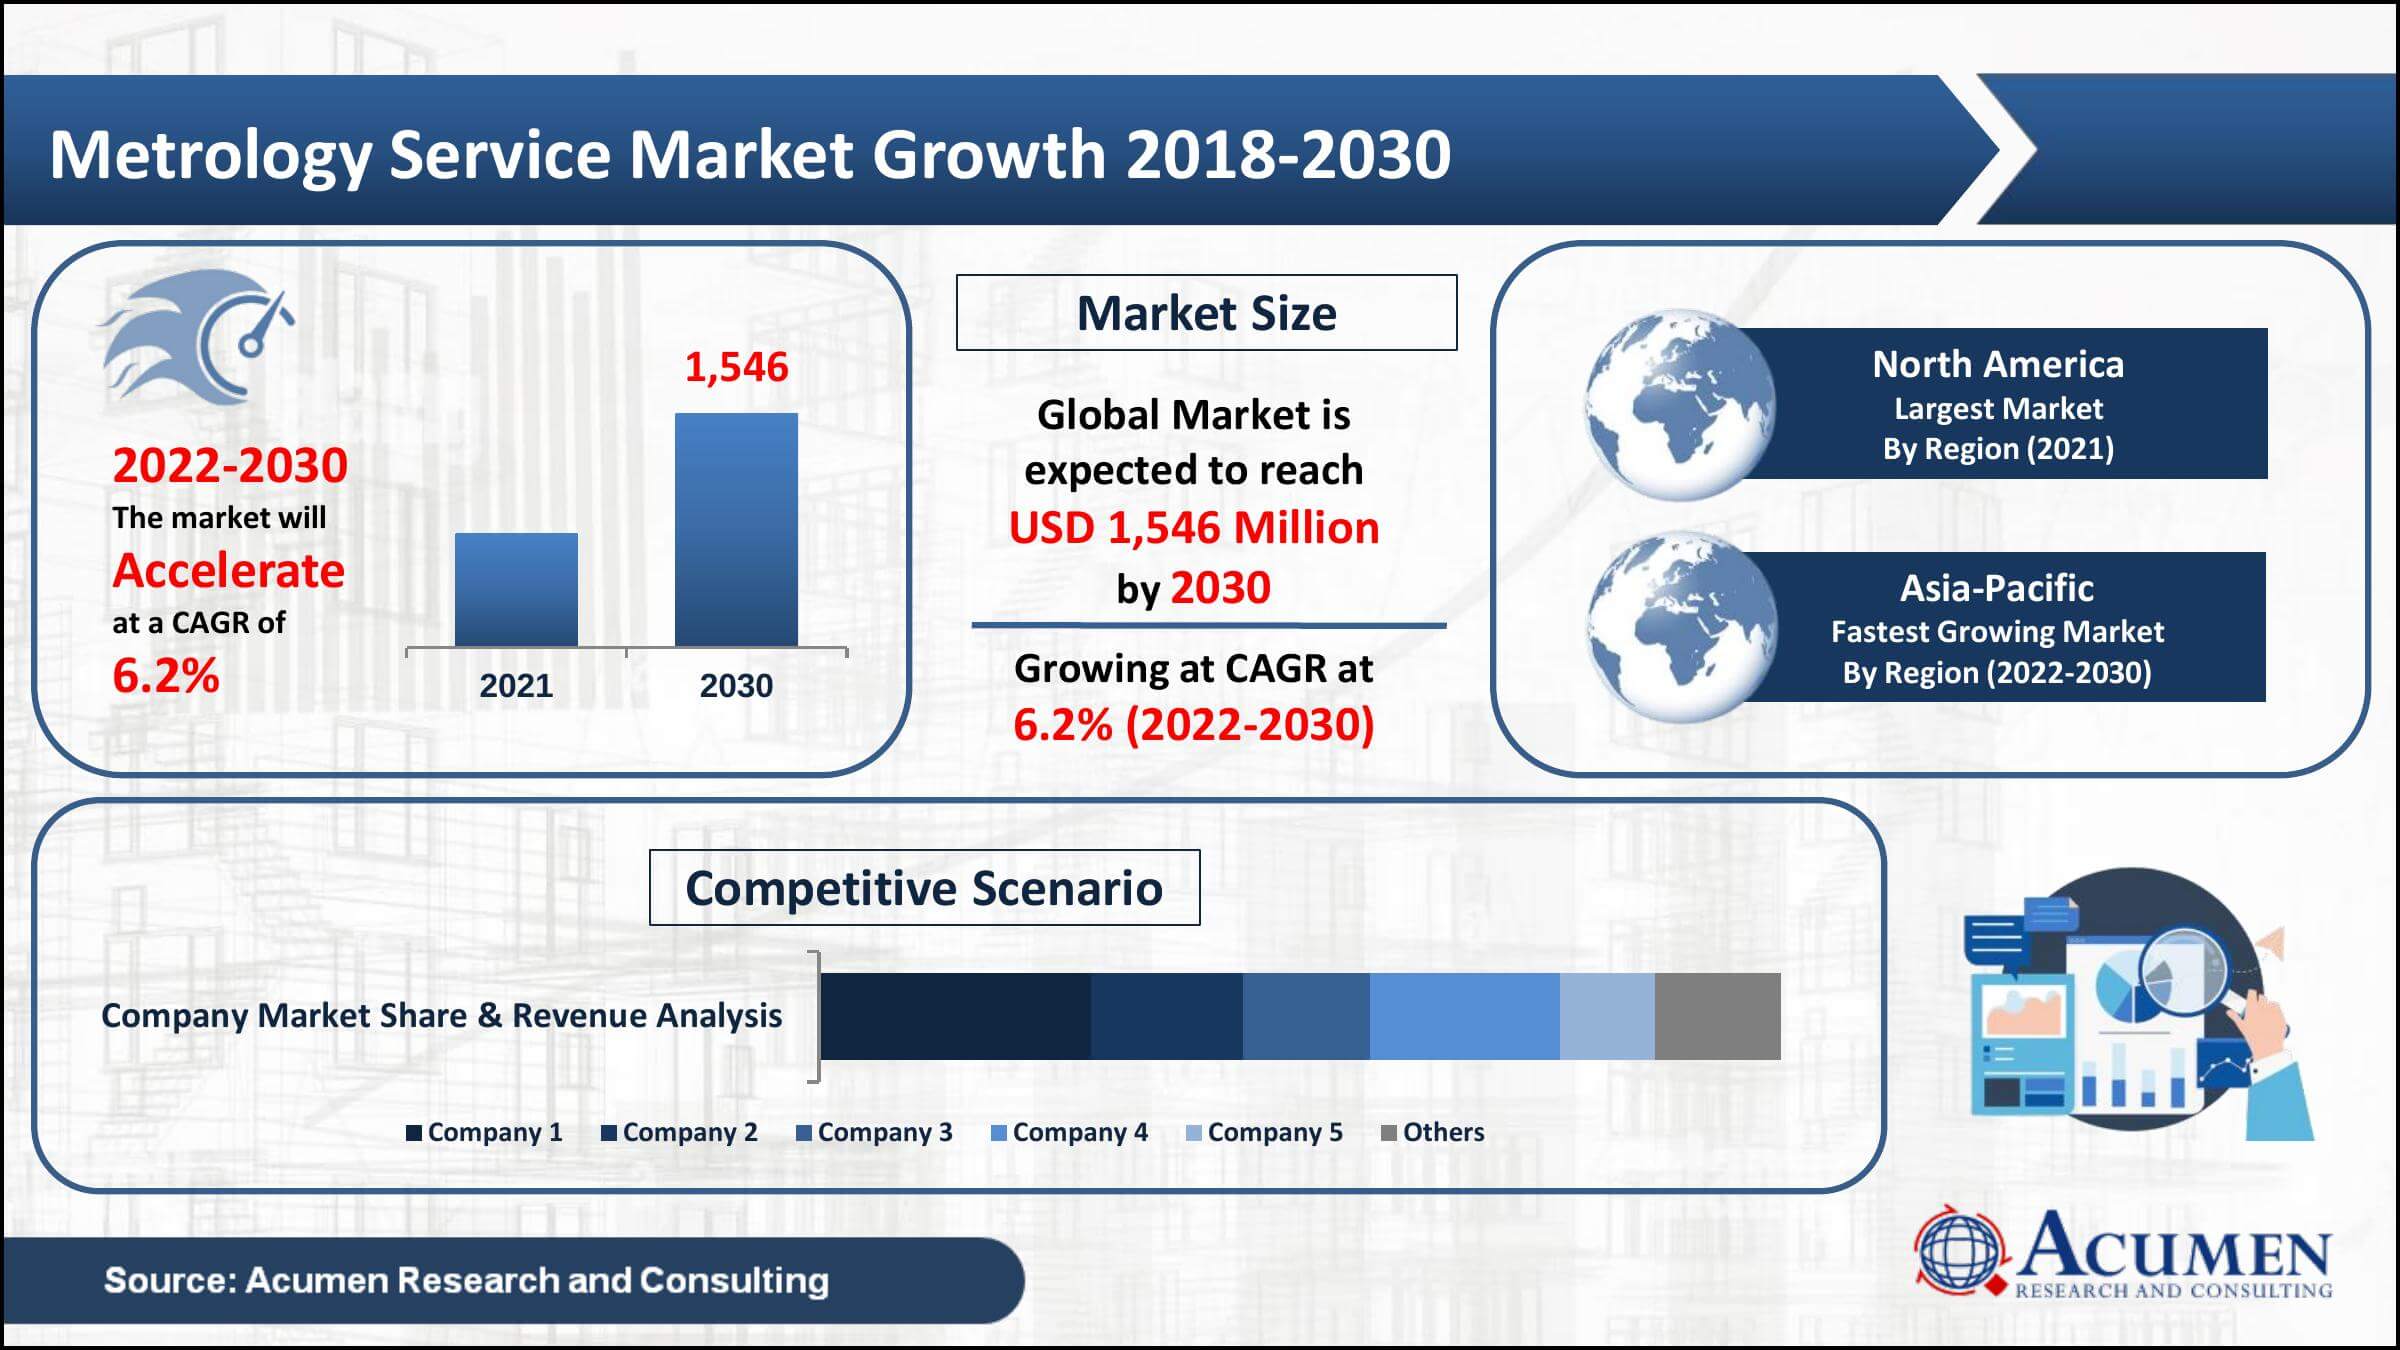 Global metrology service market revenue collected USD 906 Million in 2021, with a 6.2% CAGR between 2022 and 2030